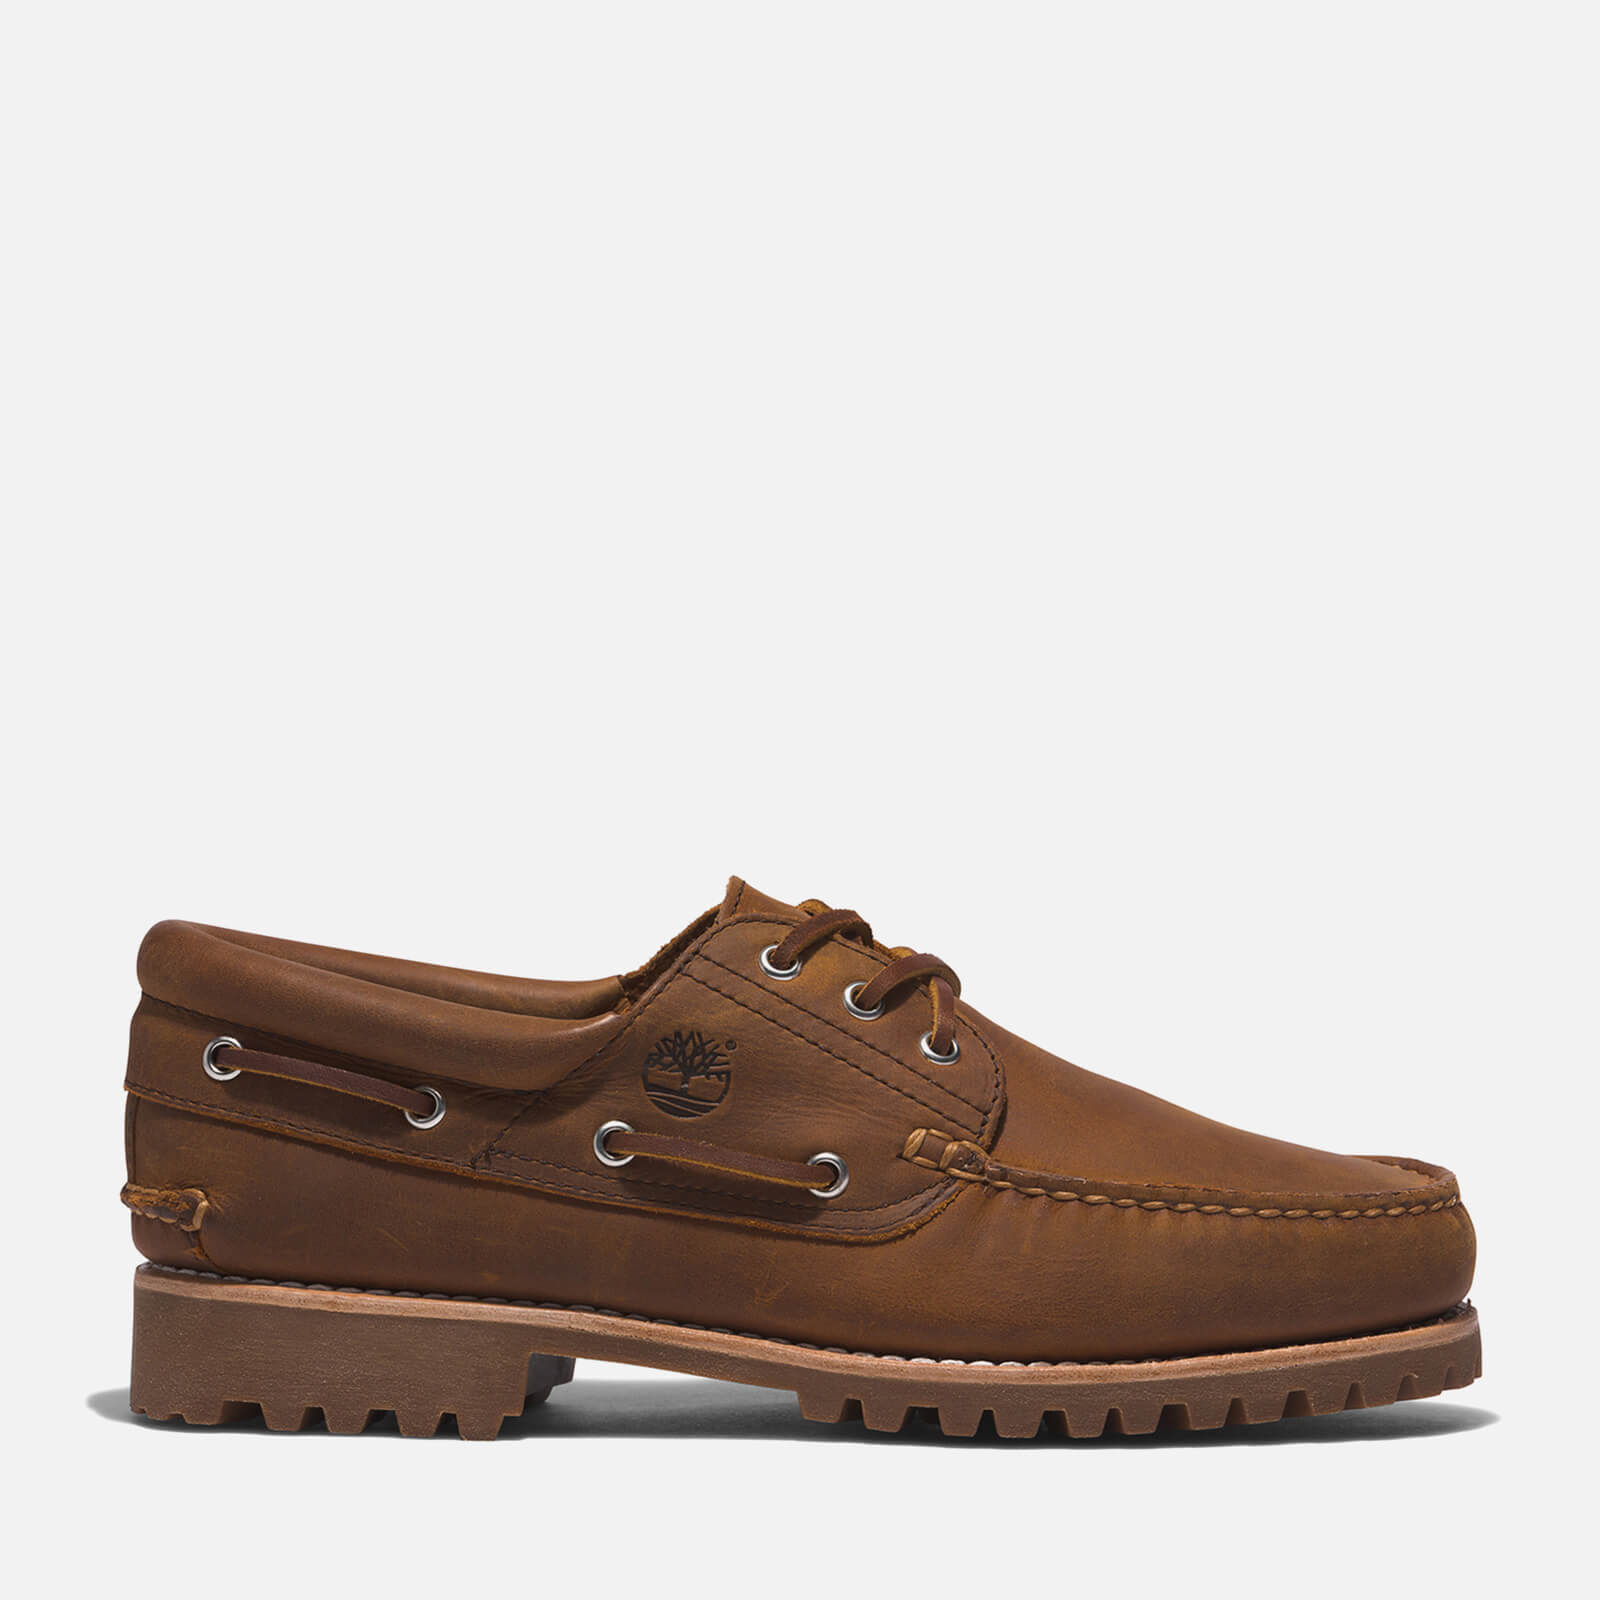 Timberland Authentics Handsewn Suede Boat Shoes - Uk 8